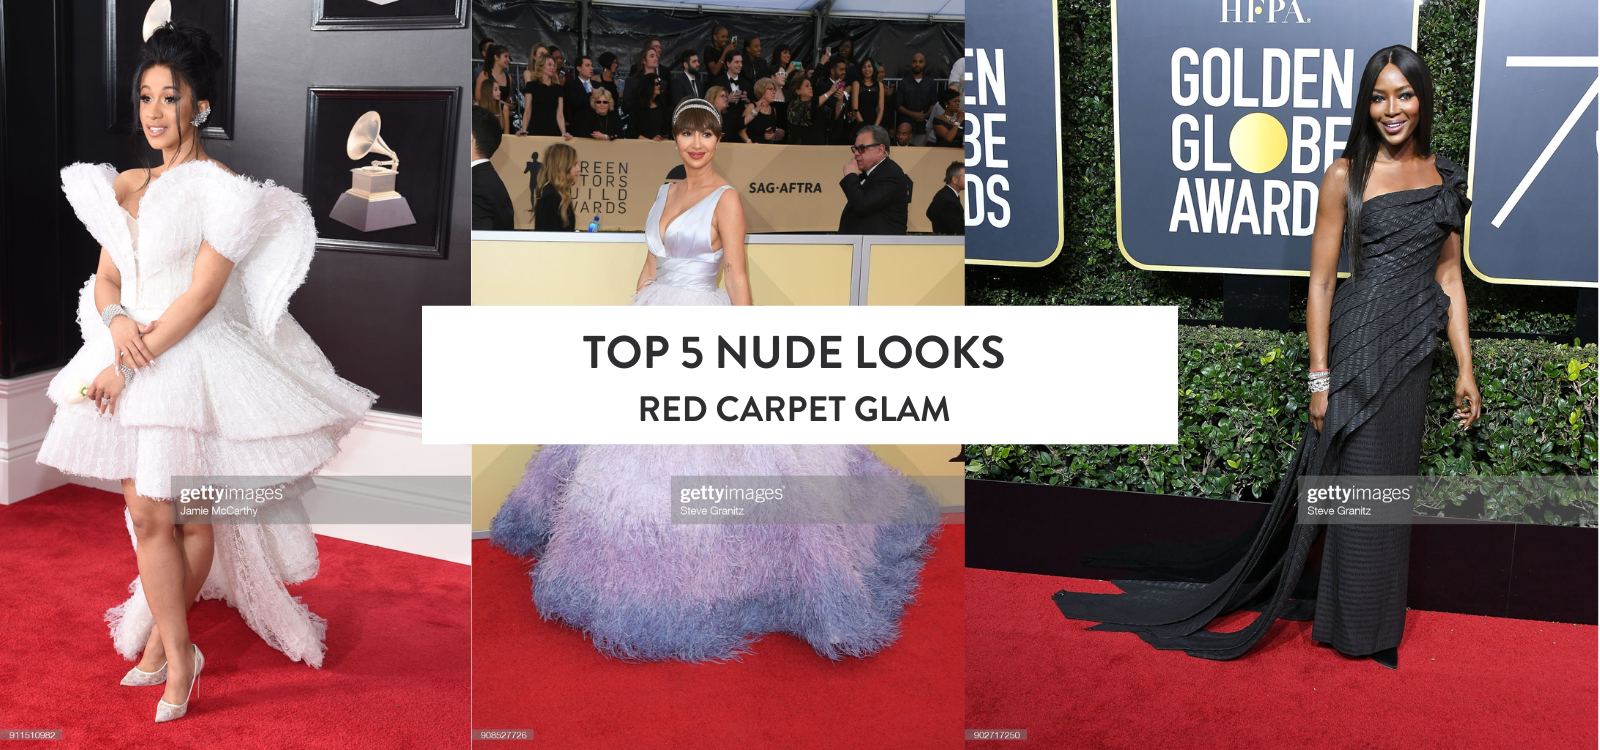 Top 5 Nude Looks: Red Carpet Glam – Mented Cosmetics